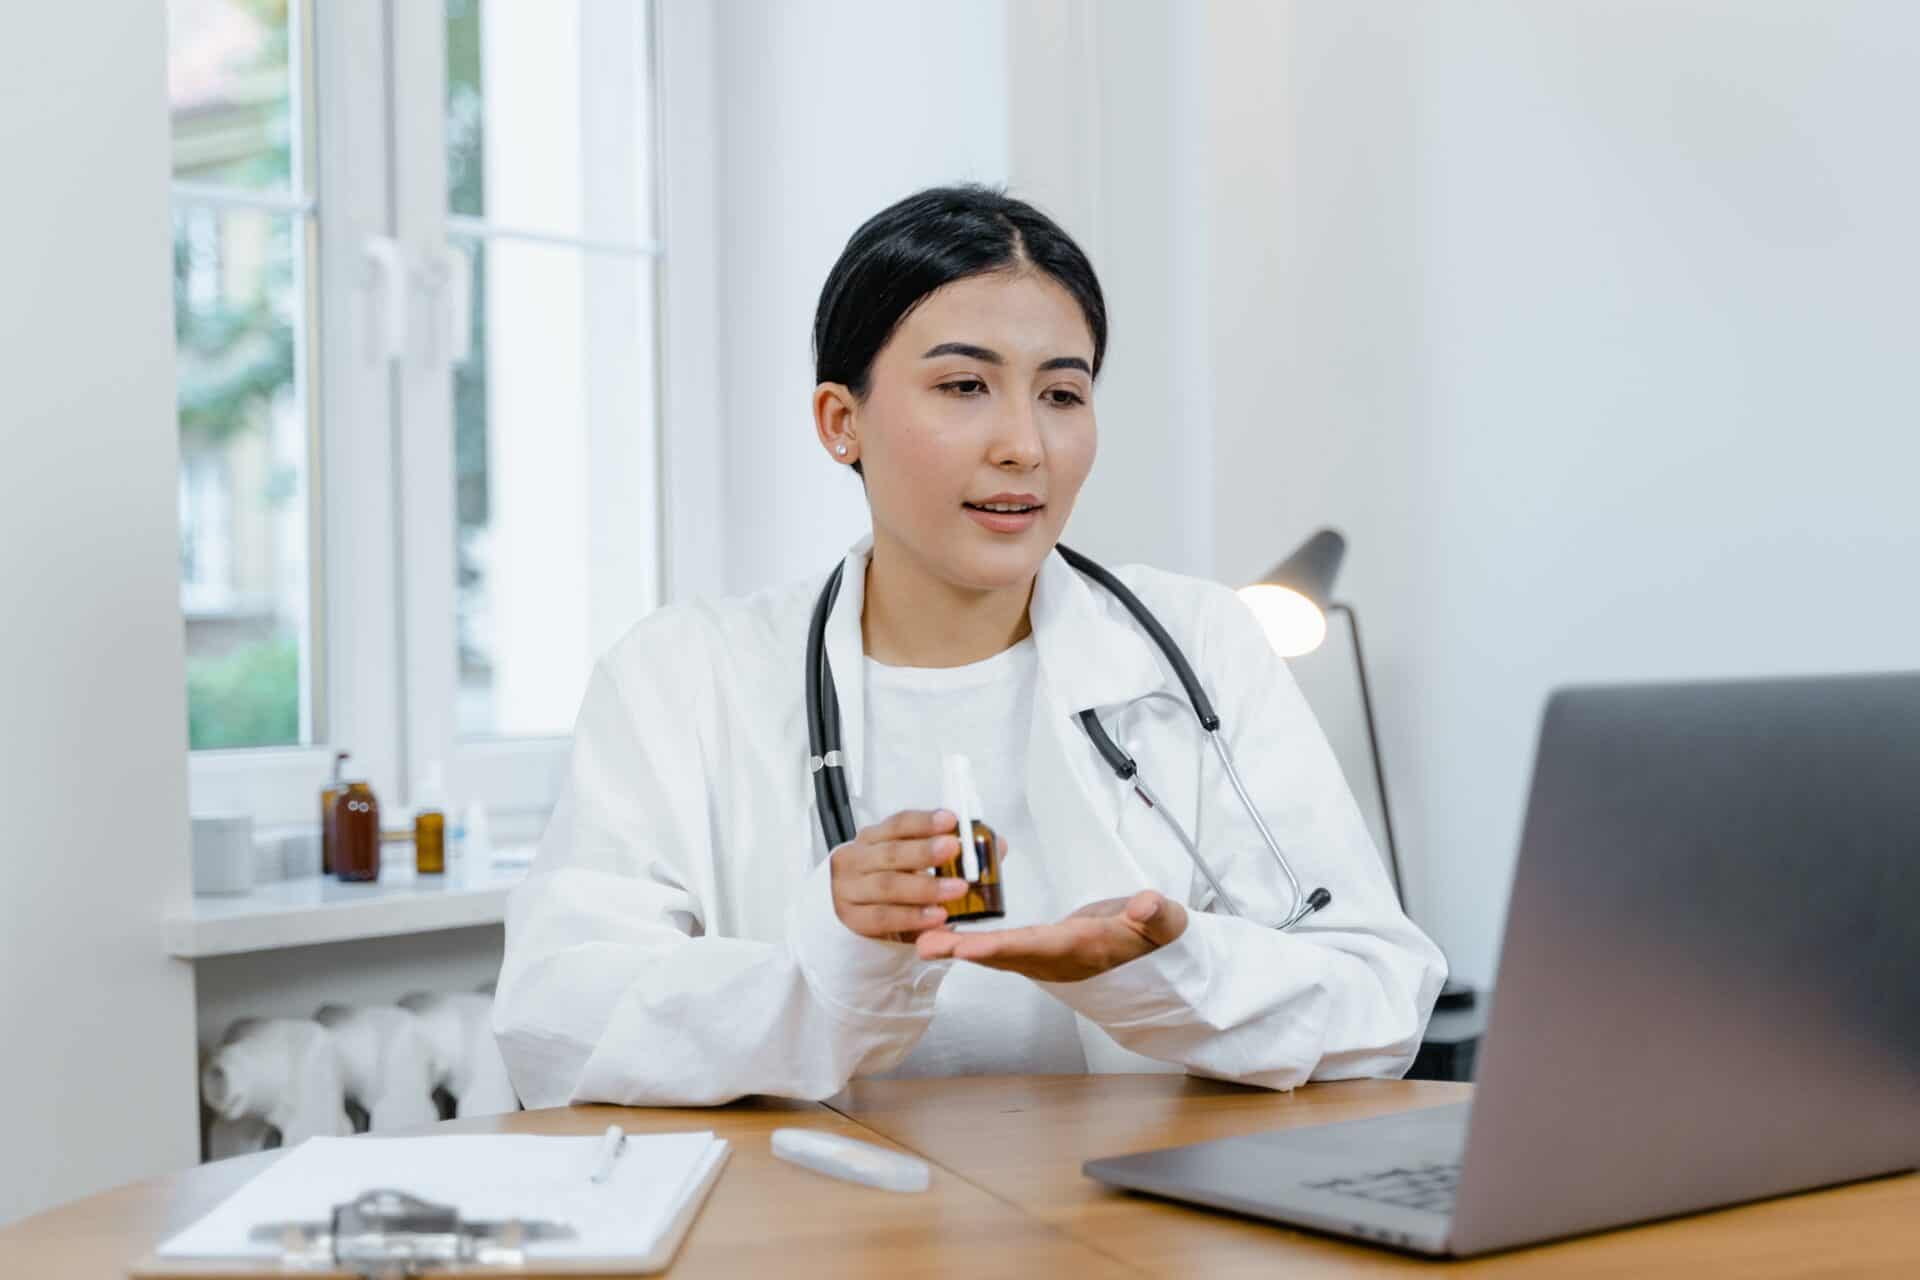 woman doctor in white coat looking at laptop